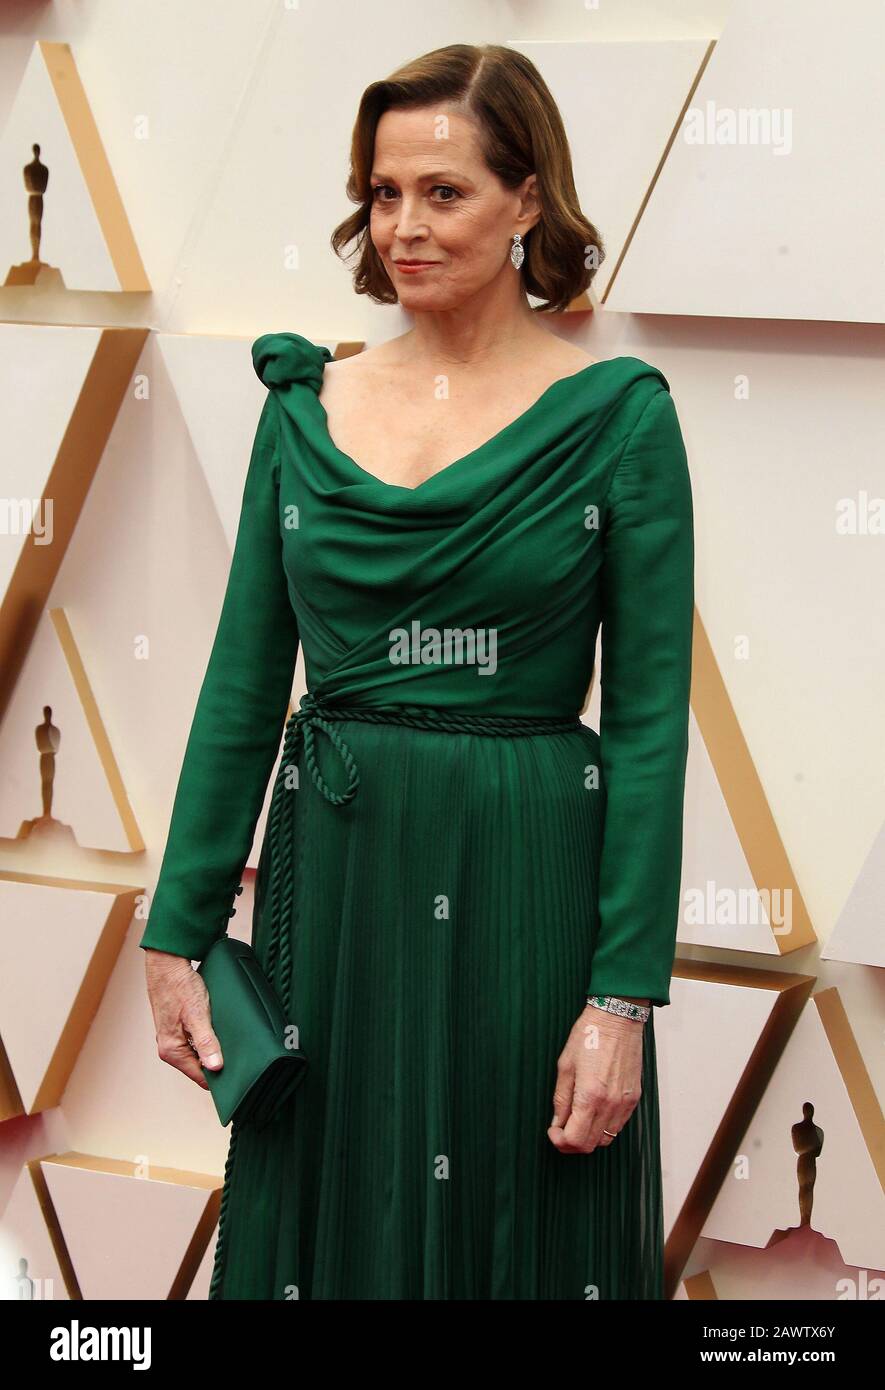 09 February 2020 - Hollywood, California - Sigourney Weaver. 92nd Annual Academy Awards presented by the Academy of Motion Picture Arts and Sciences held at Hollywood & Highland Center. (Credit Image: © AdMedia via ZUMA Wire) Stock Photo